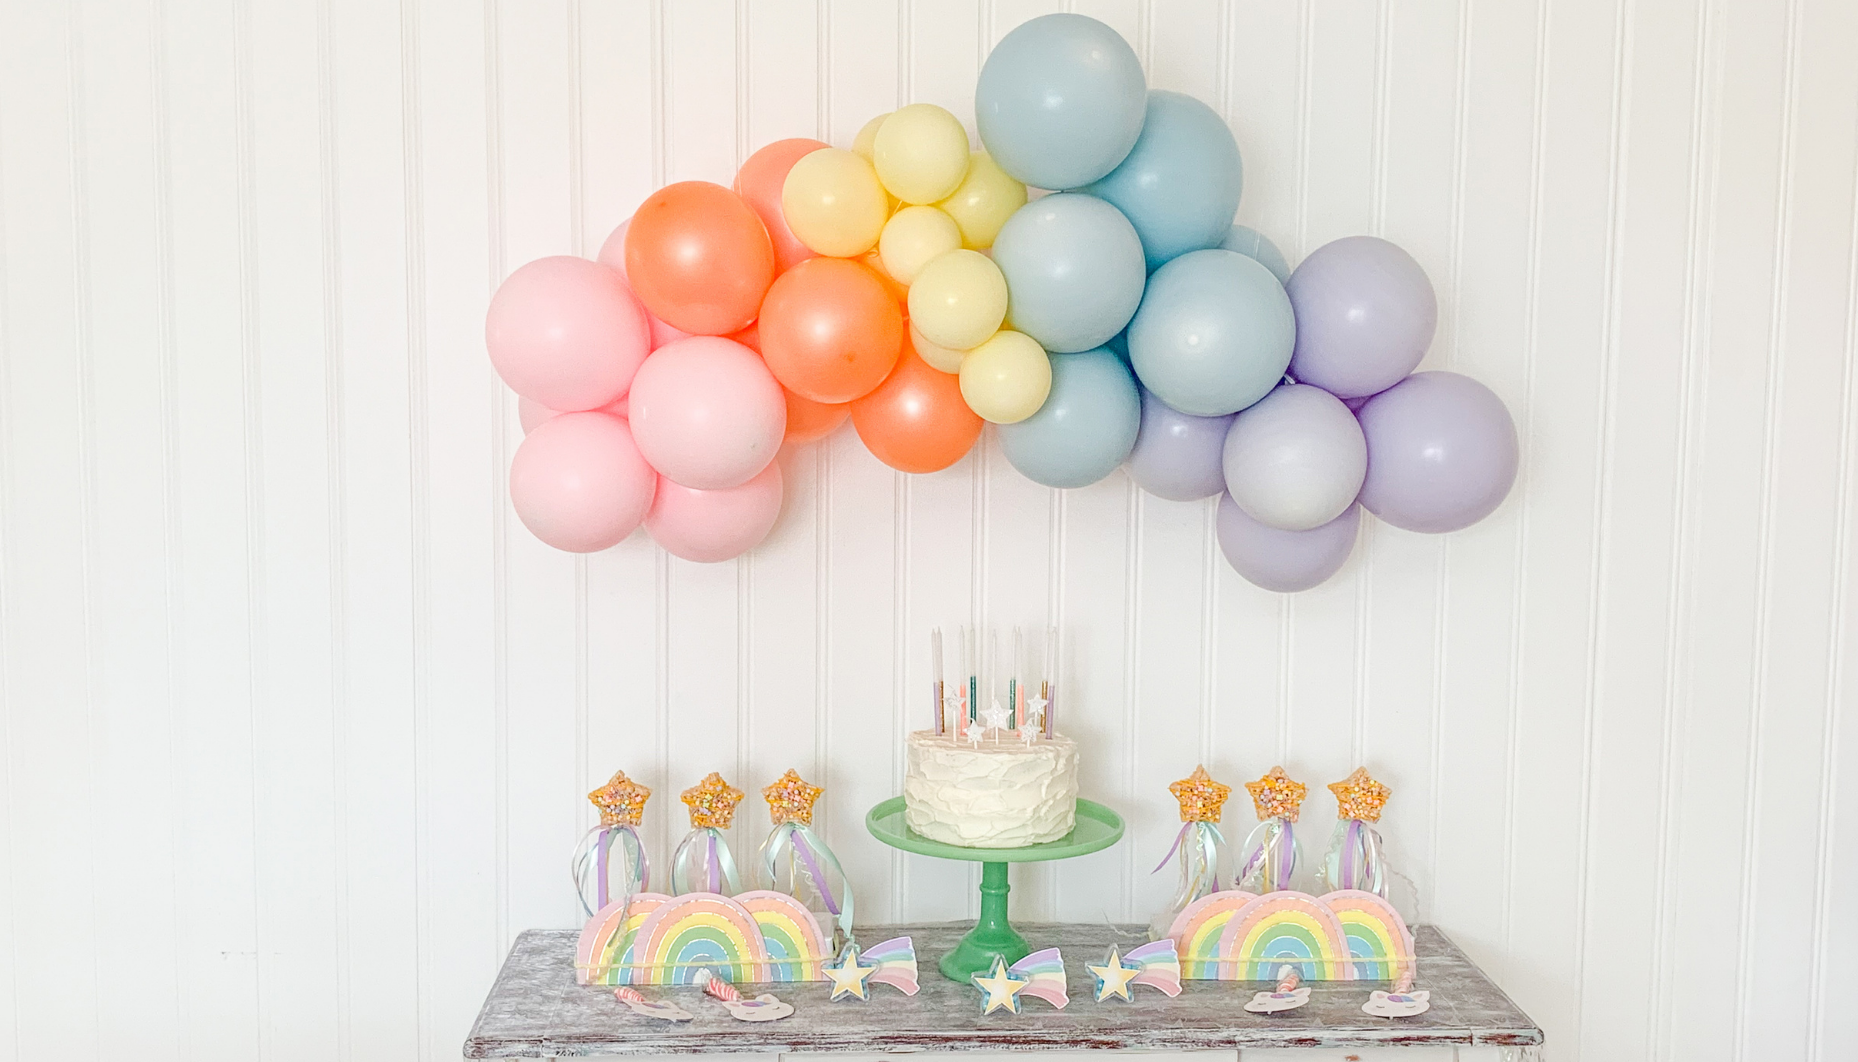 Wish Cake Table Party Backdrop Sign Magical Rainbow Foil Balloons Party Kit